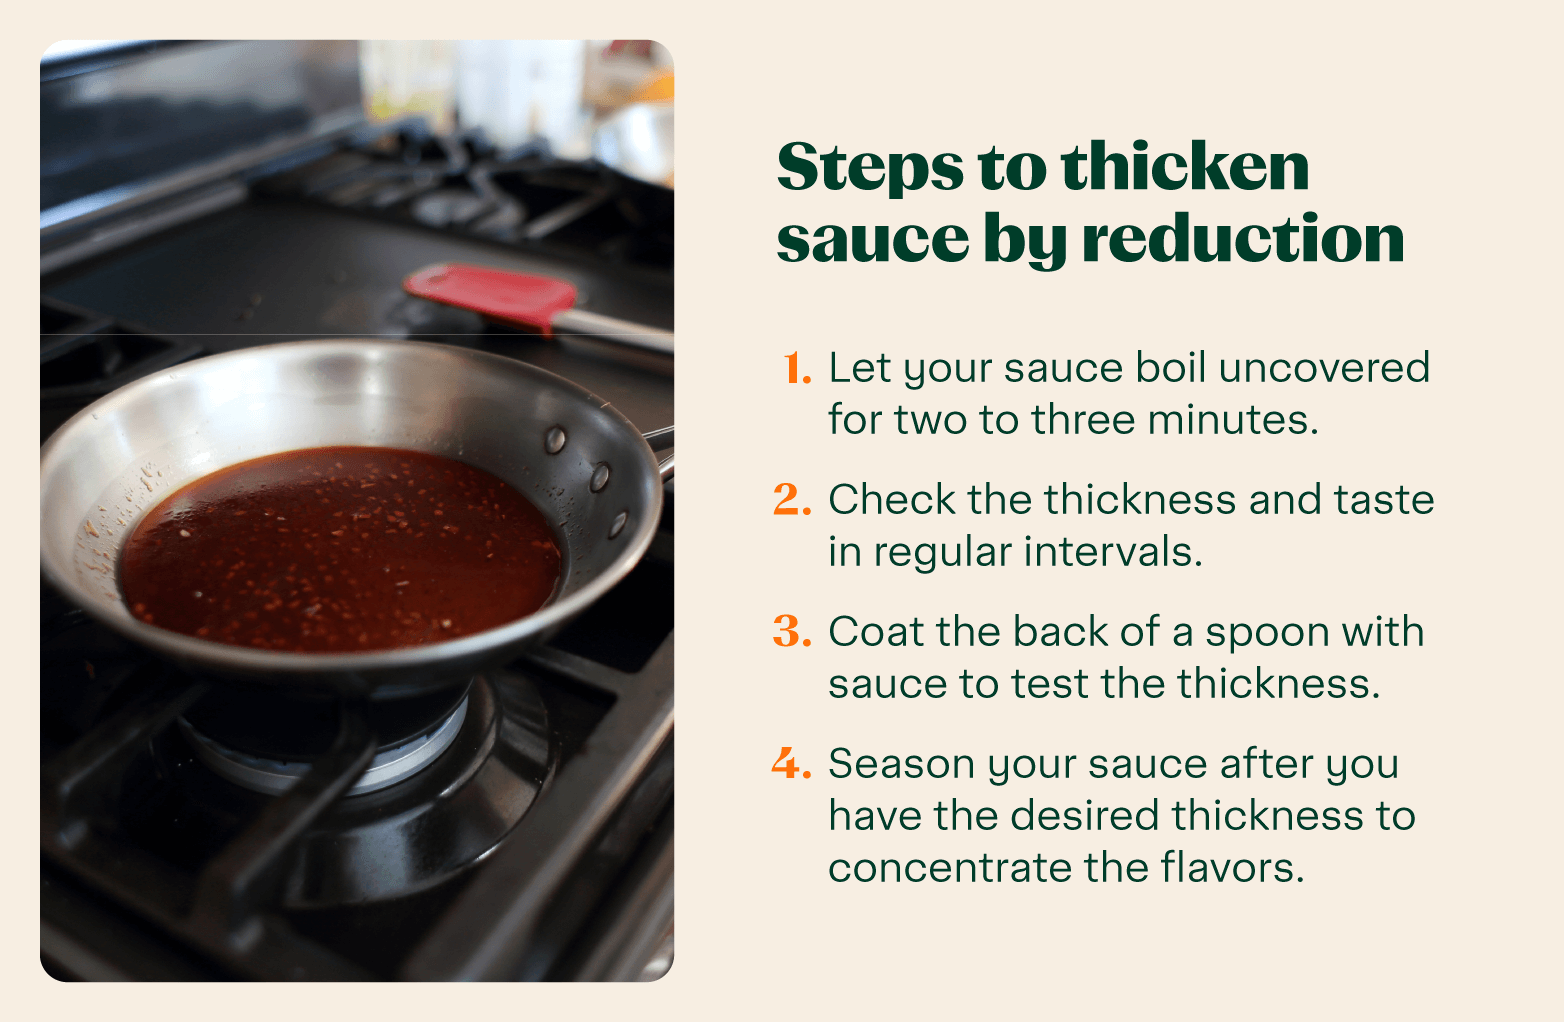 how to thicken sauce by reduction